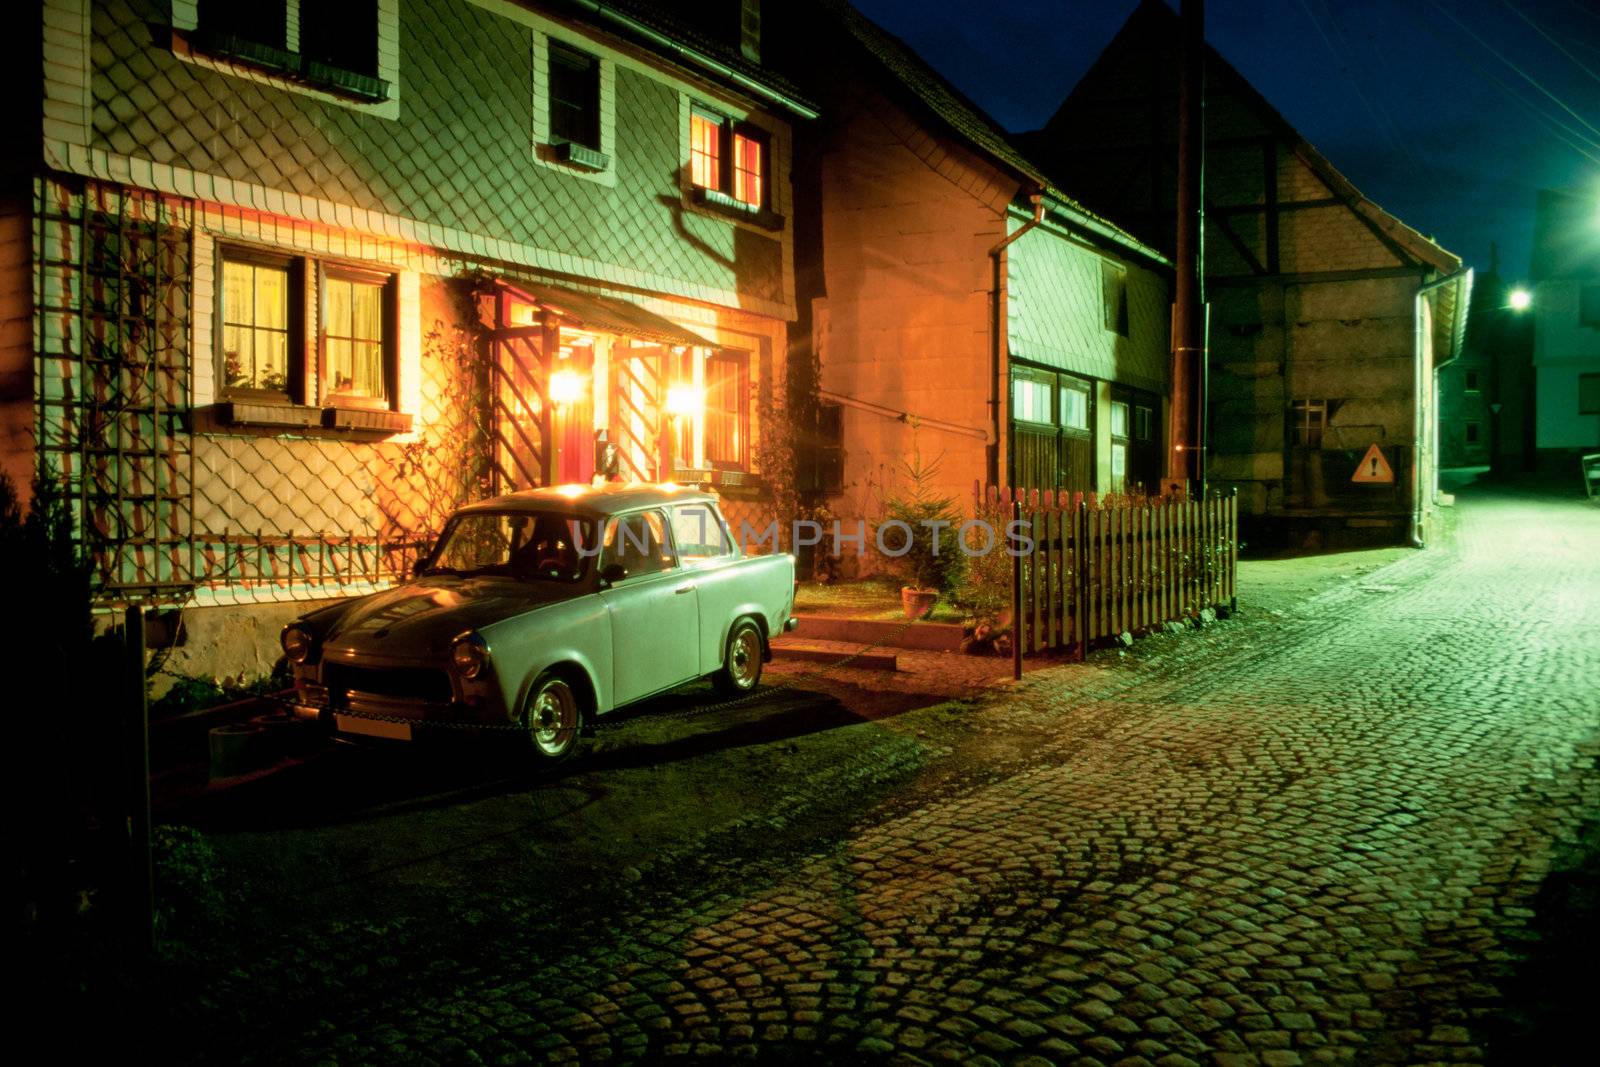 At night in Thuringia village, Germay by PiLens